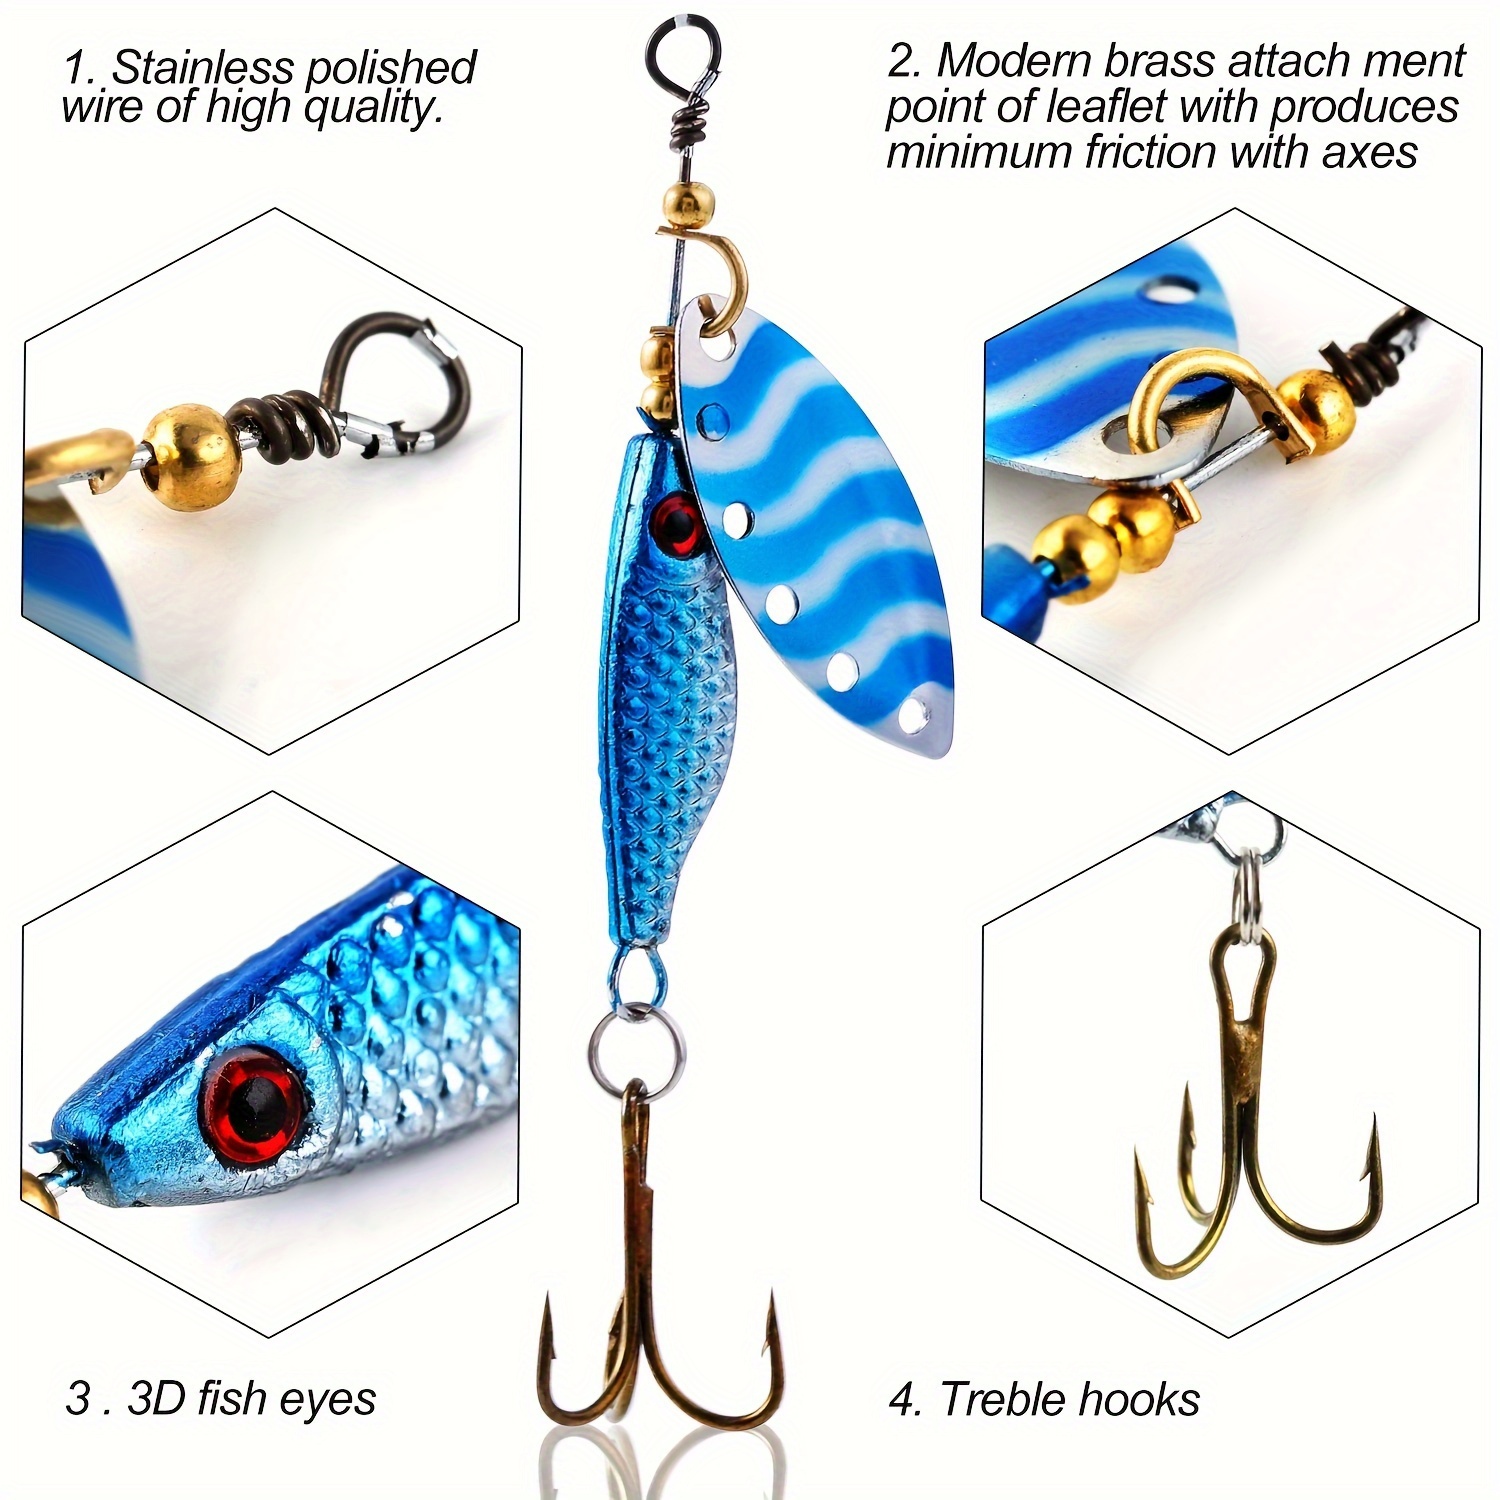 Sougayilang 5pcs/box Metal Spinner Lure, Bionic Fishing Lures For Trout  Pike Perch Salmon Bass, With Hard Metal Hooks, Fishing Tackle